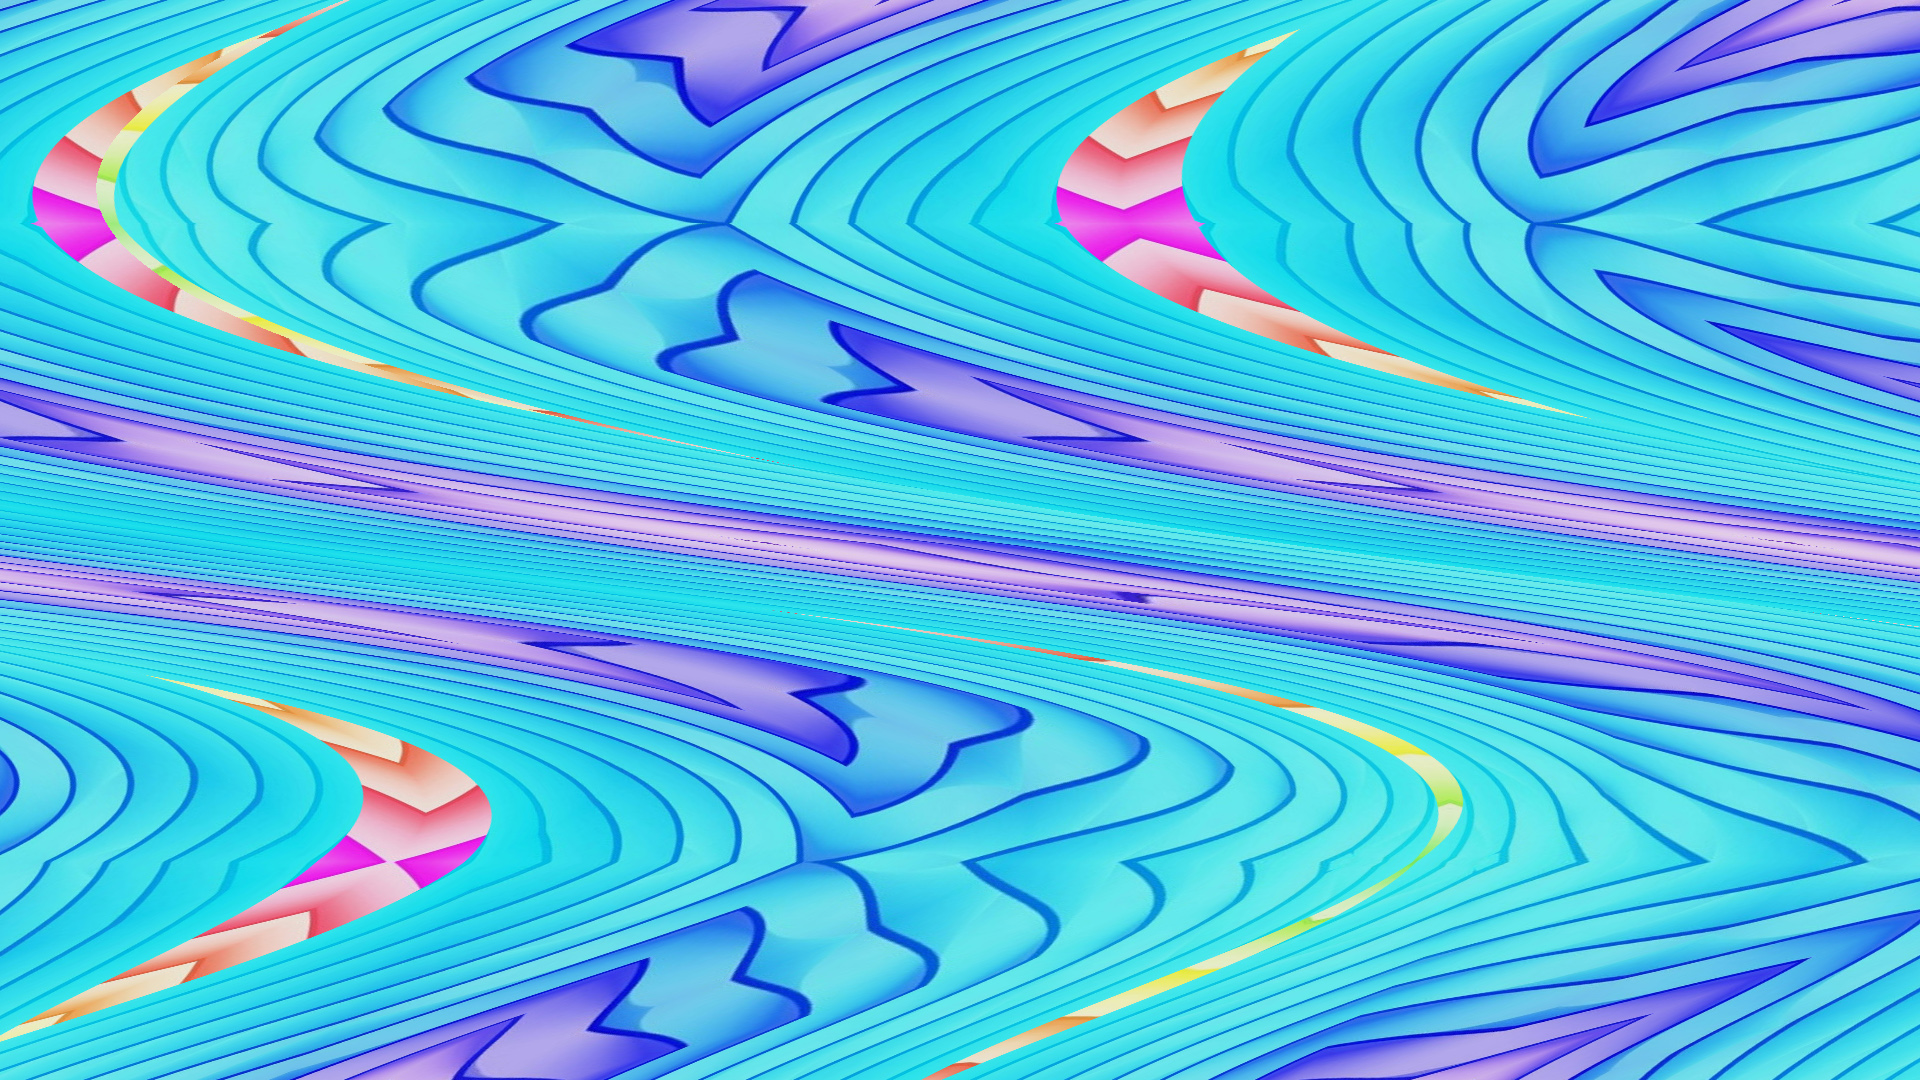 Abstract Artistic Blue Colorful Colors Curves Digital Art 1920x1080